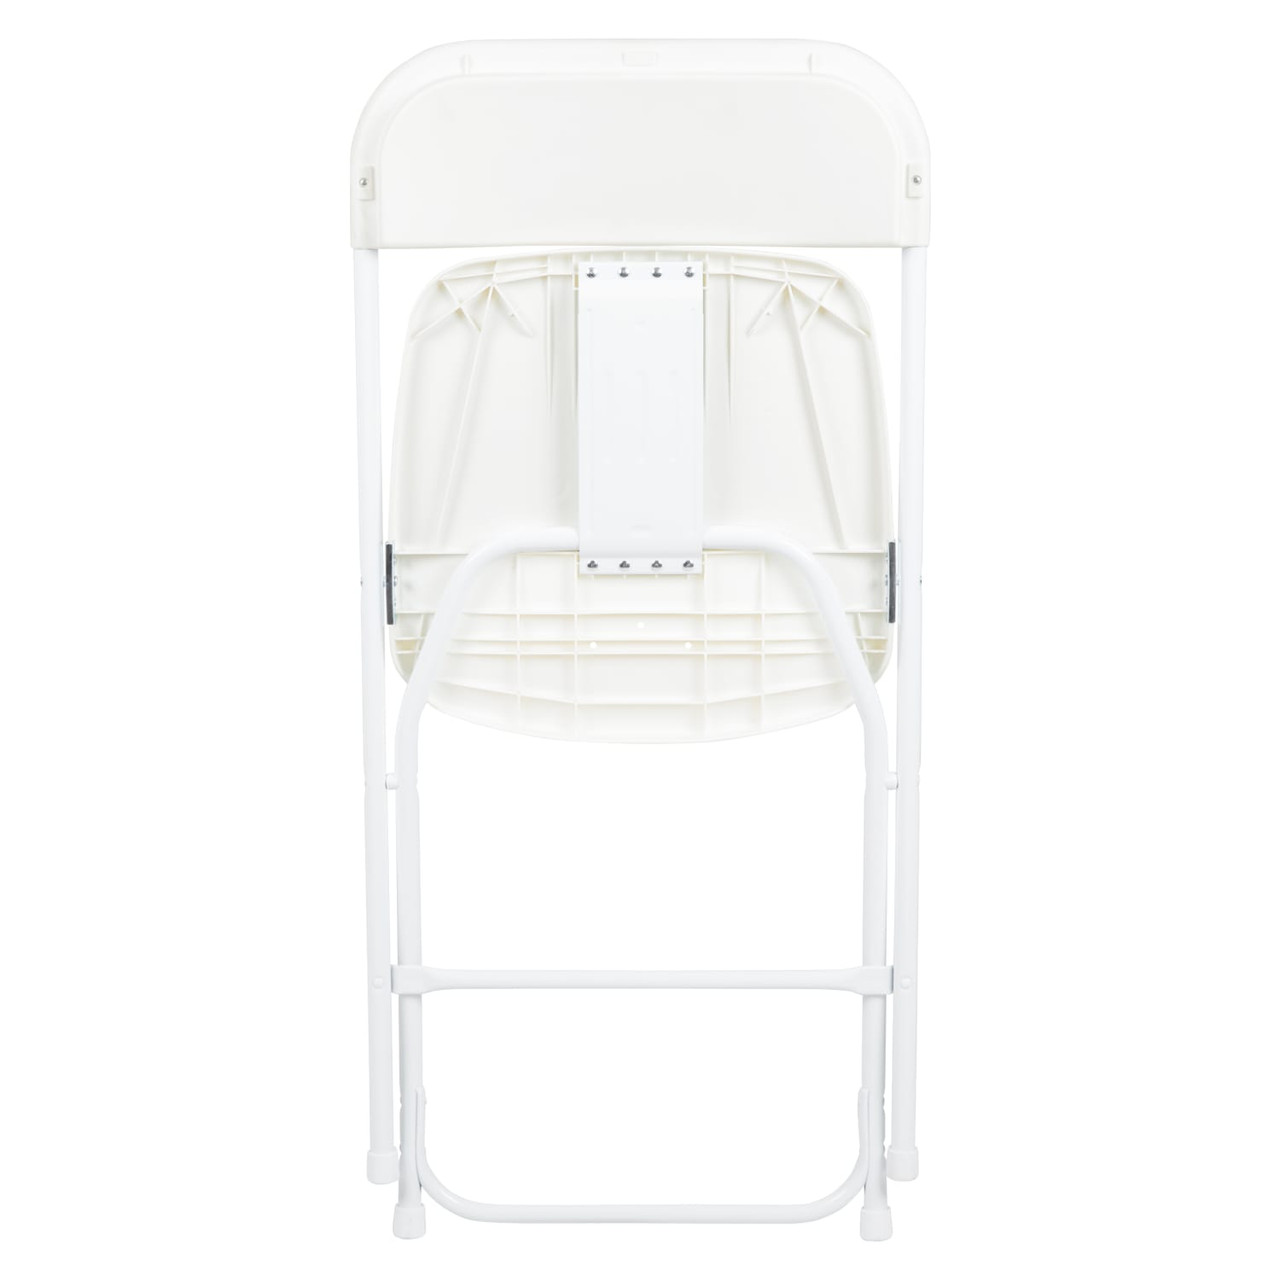 Hercules  Series Plastic Folding Chair - White - 10 Pack Comfortable Event Chair-Lightweight Folding Chair